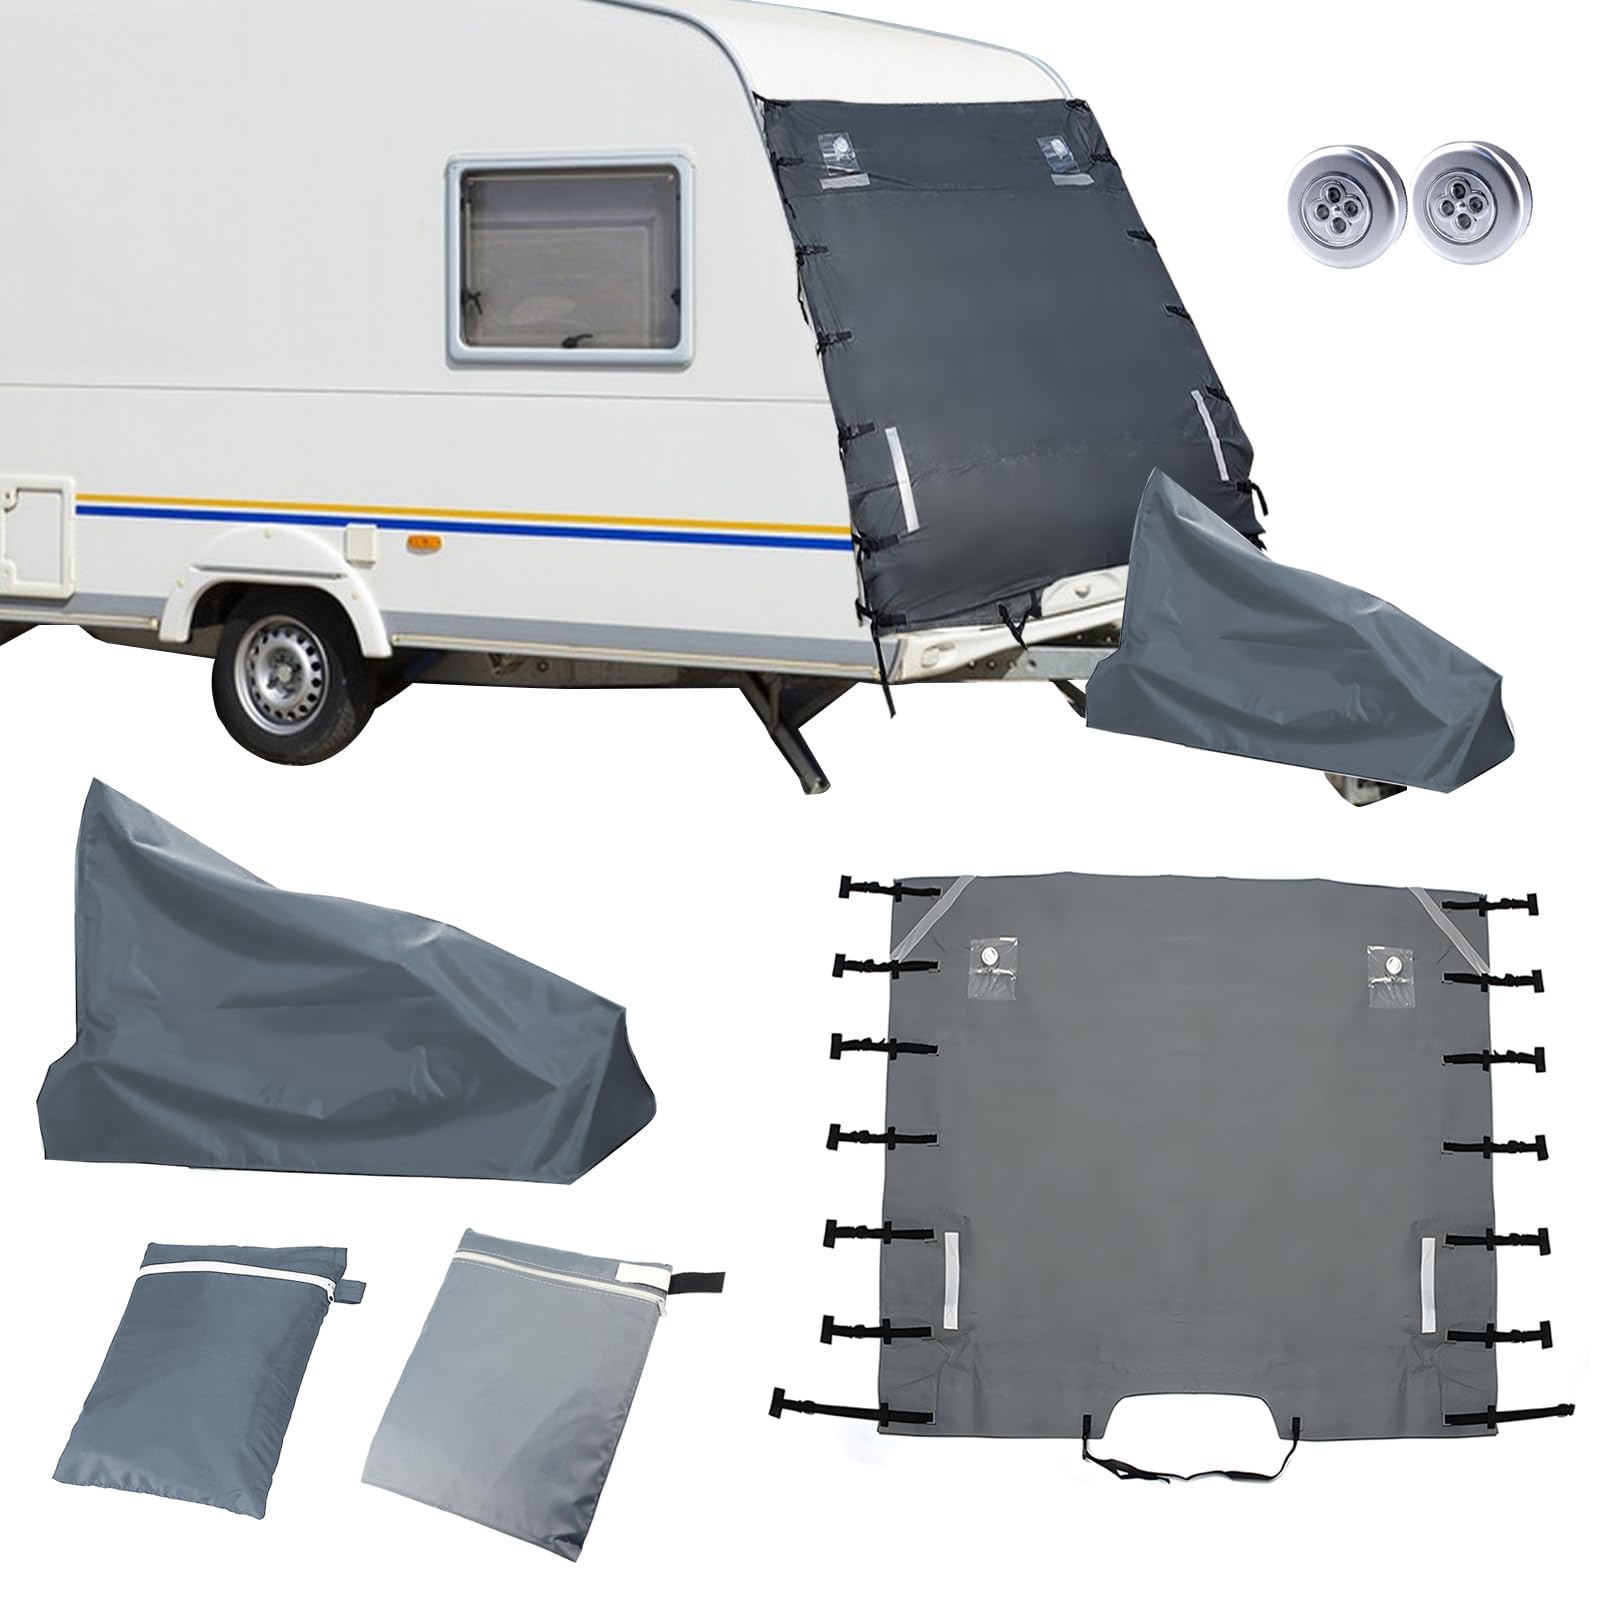 Universal Caravan Front Cover Front Cover Protector Waterproof Breathable Caravan Towing Cover with LED Lights & Reflective Strips (Caravan Front Cover & Deichselabdeckung) von JOJOCY